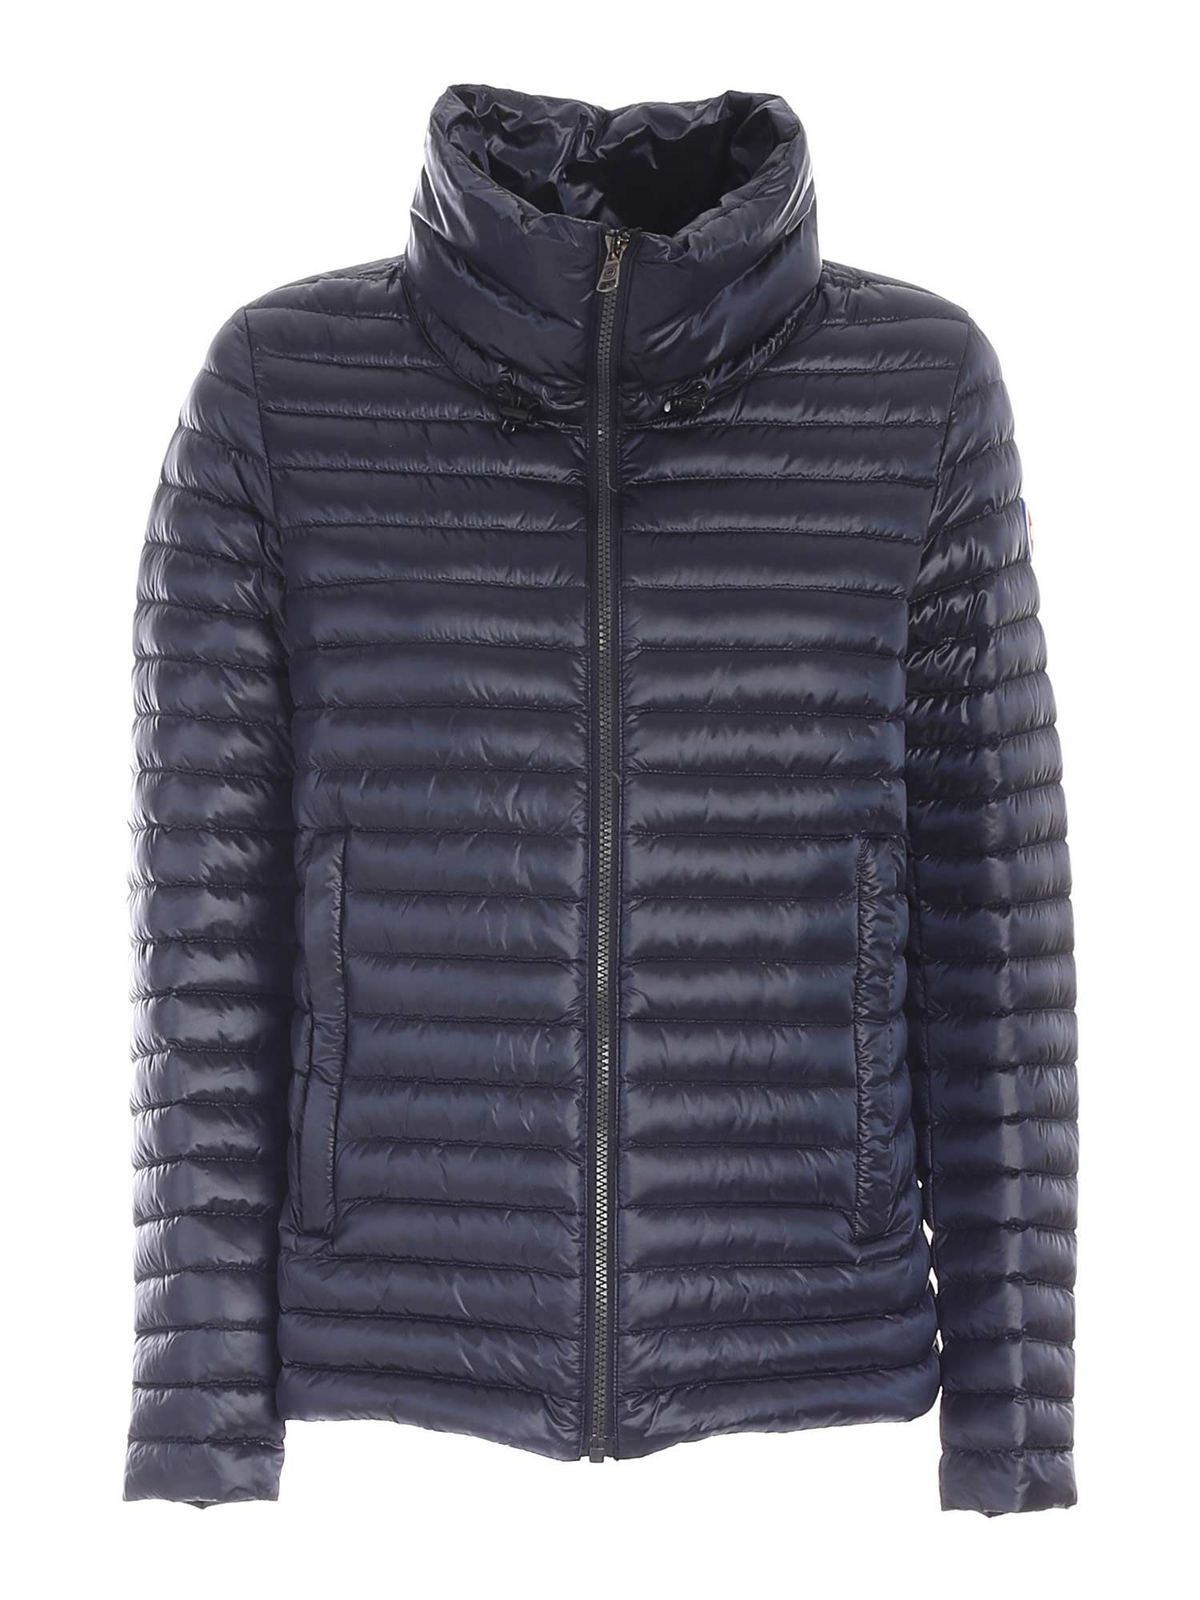 Colmar Originals - Expose padded jacket in blue - padded jackets ...